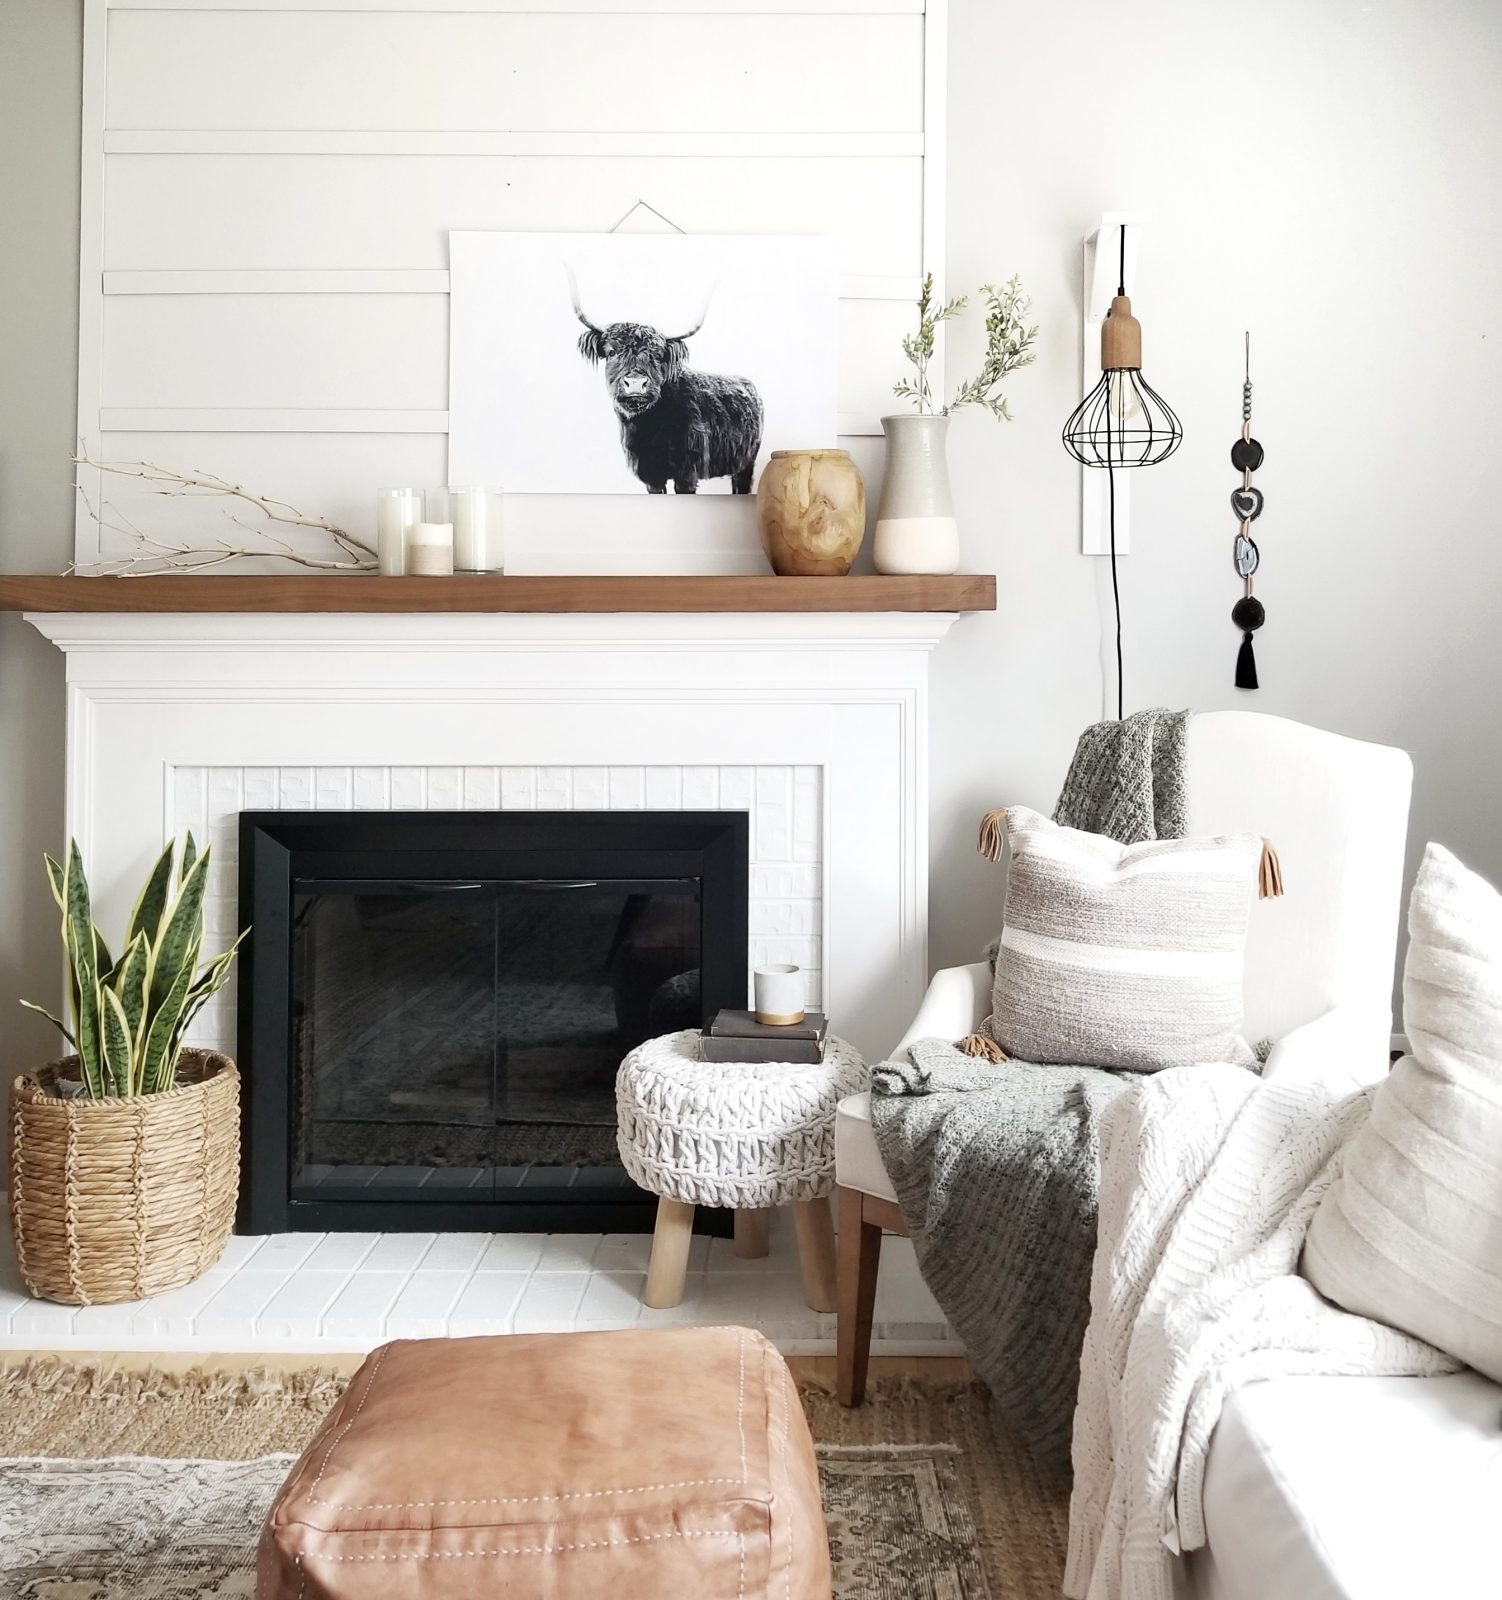 5 Simple Tips for Adding Spring to Your Home - Showit Blog